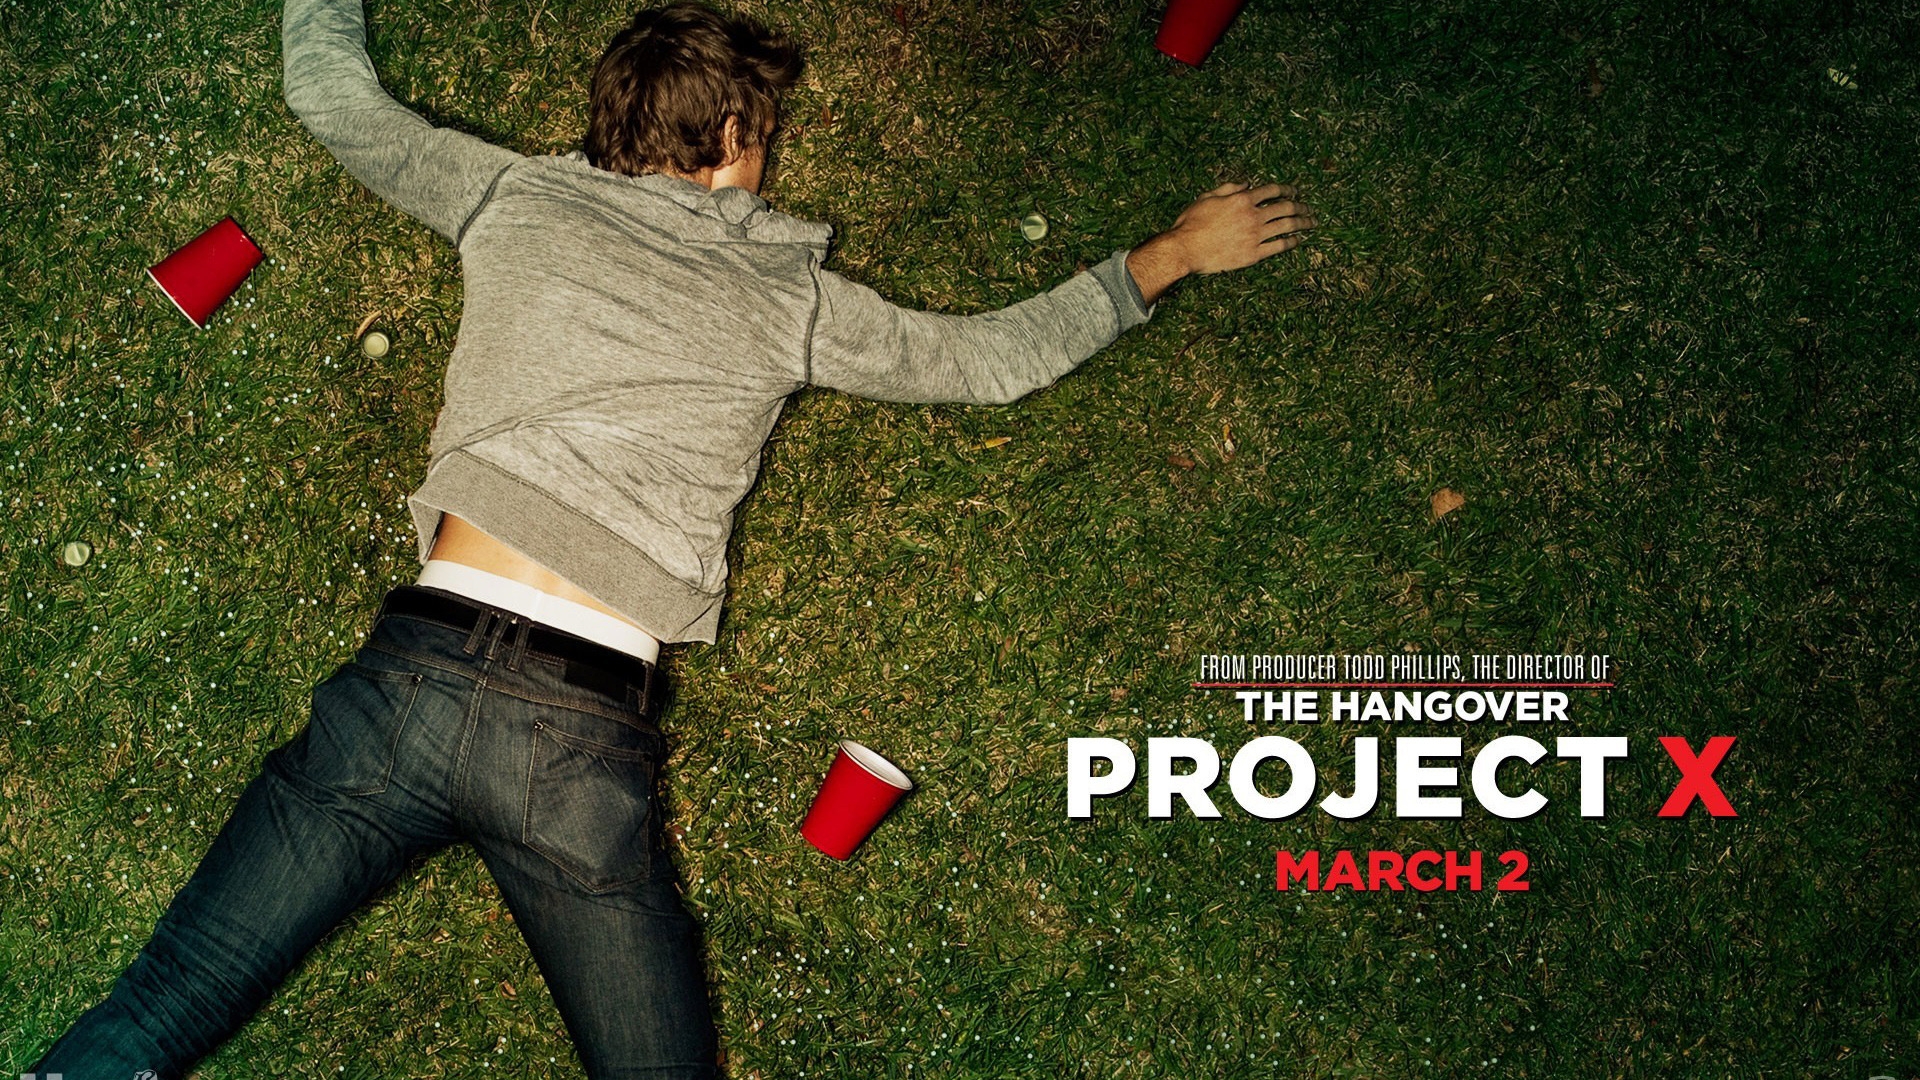 2012 Project X for 1920 x 1080 HDTV 1080p resolution